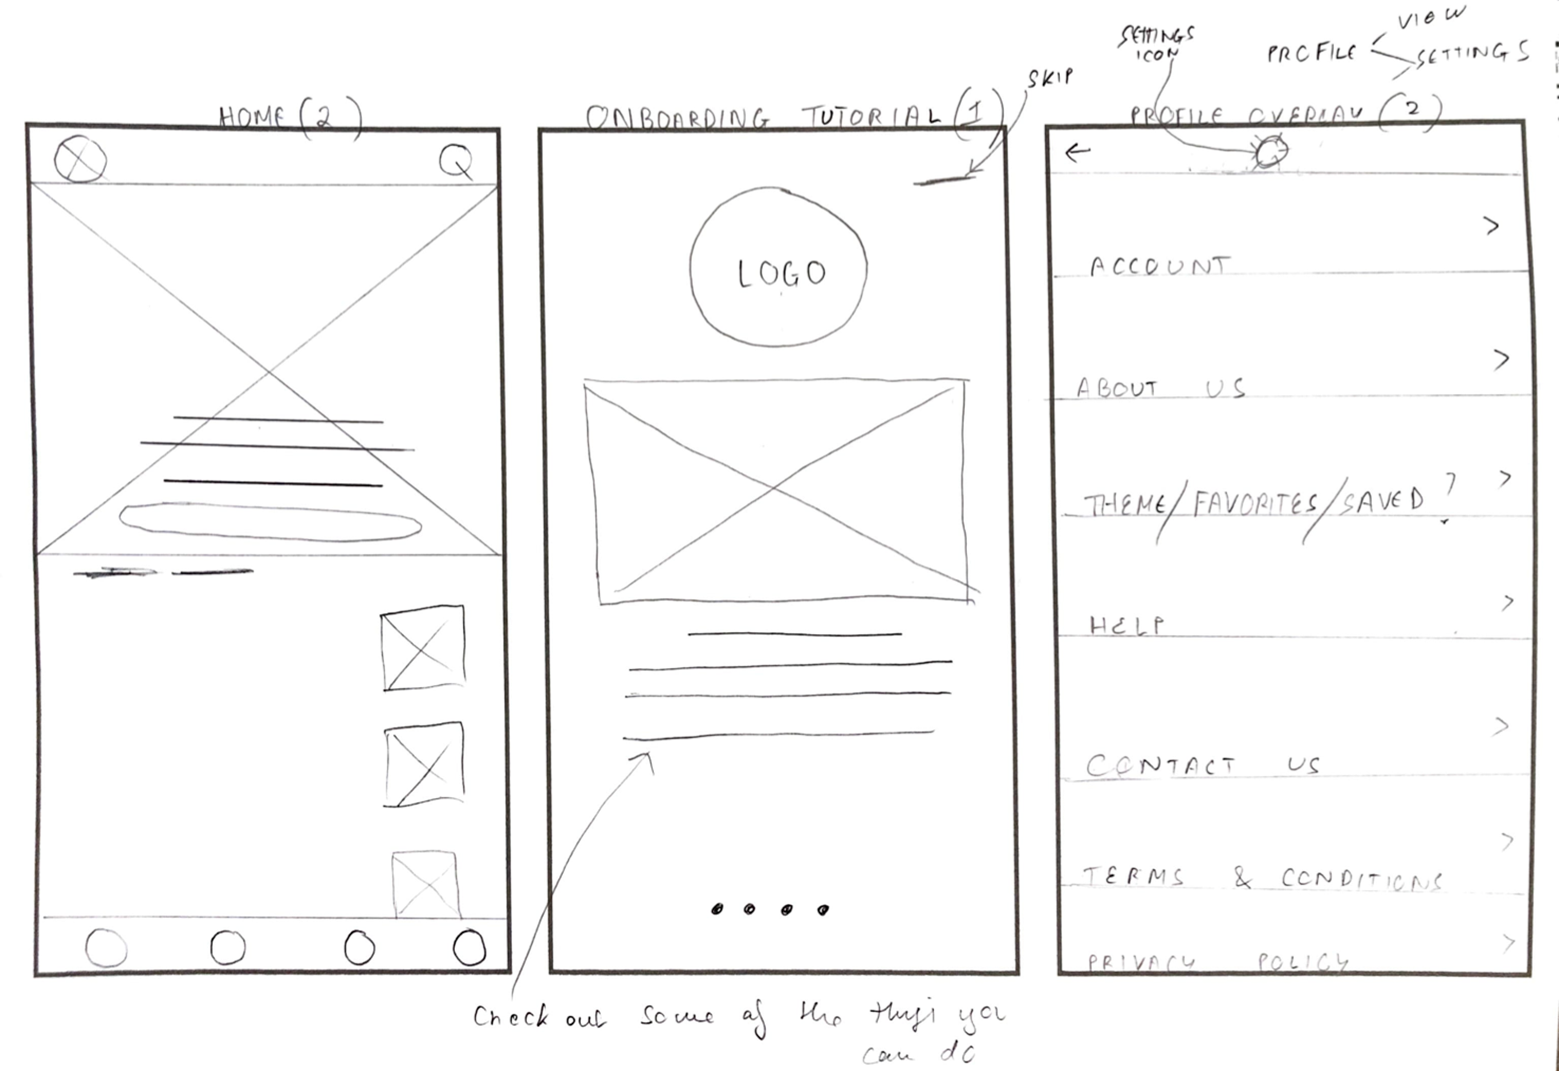 Wireframes: home screen (V2), onboarding tutorial, settings